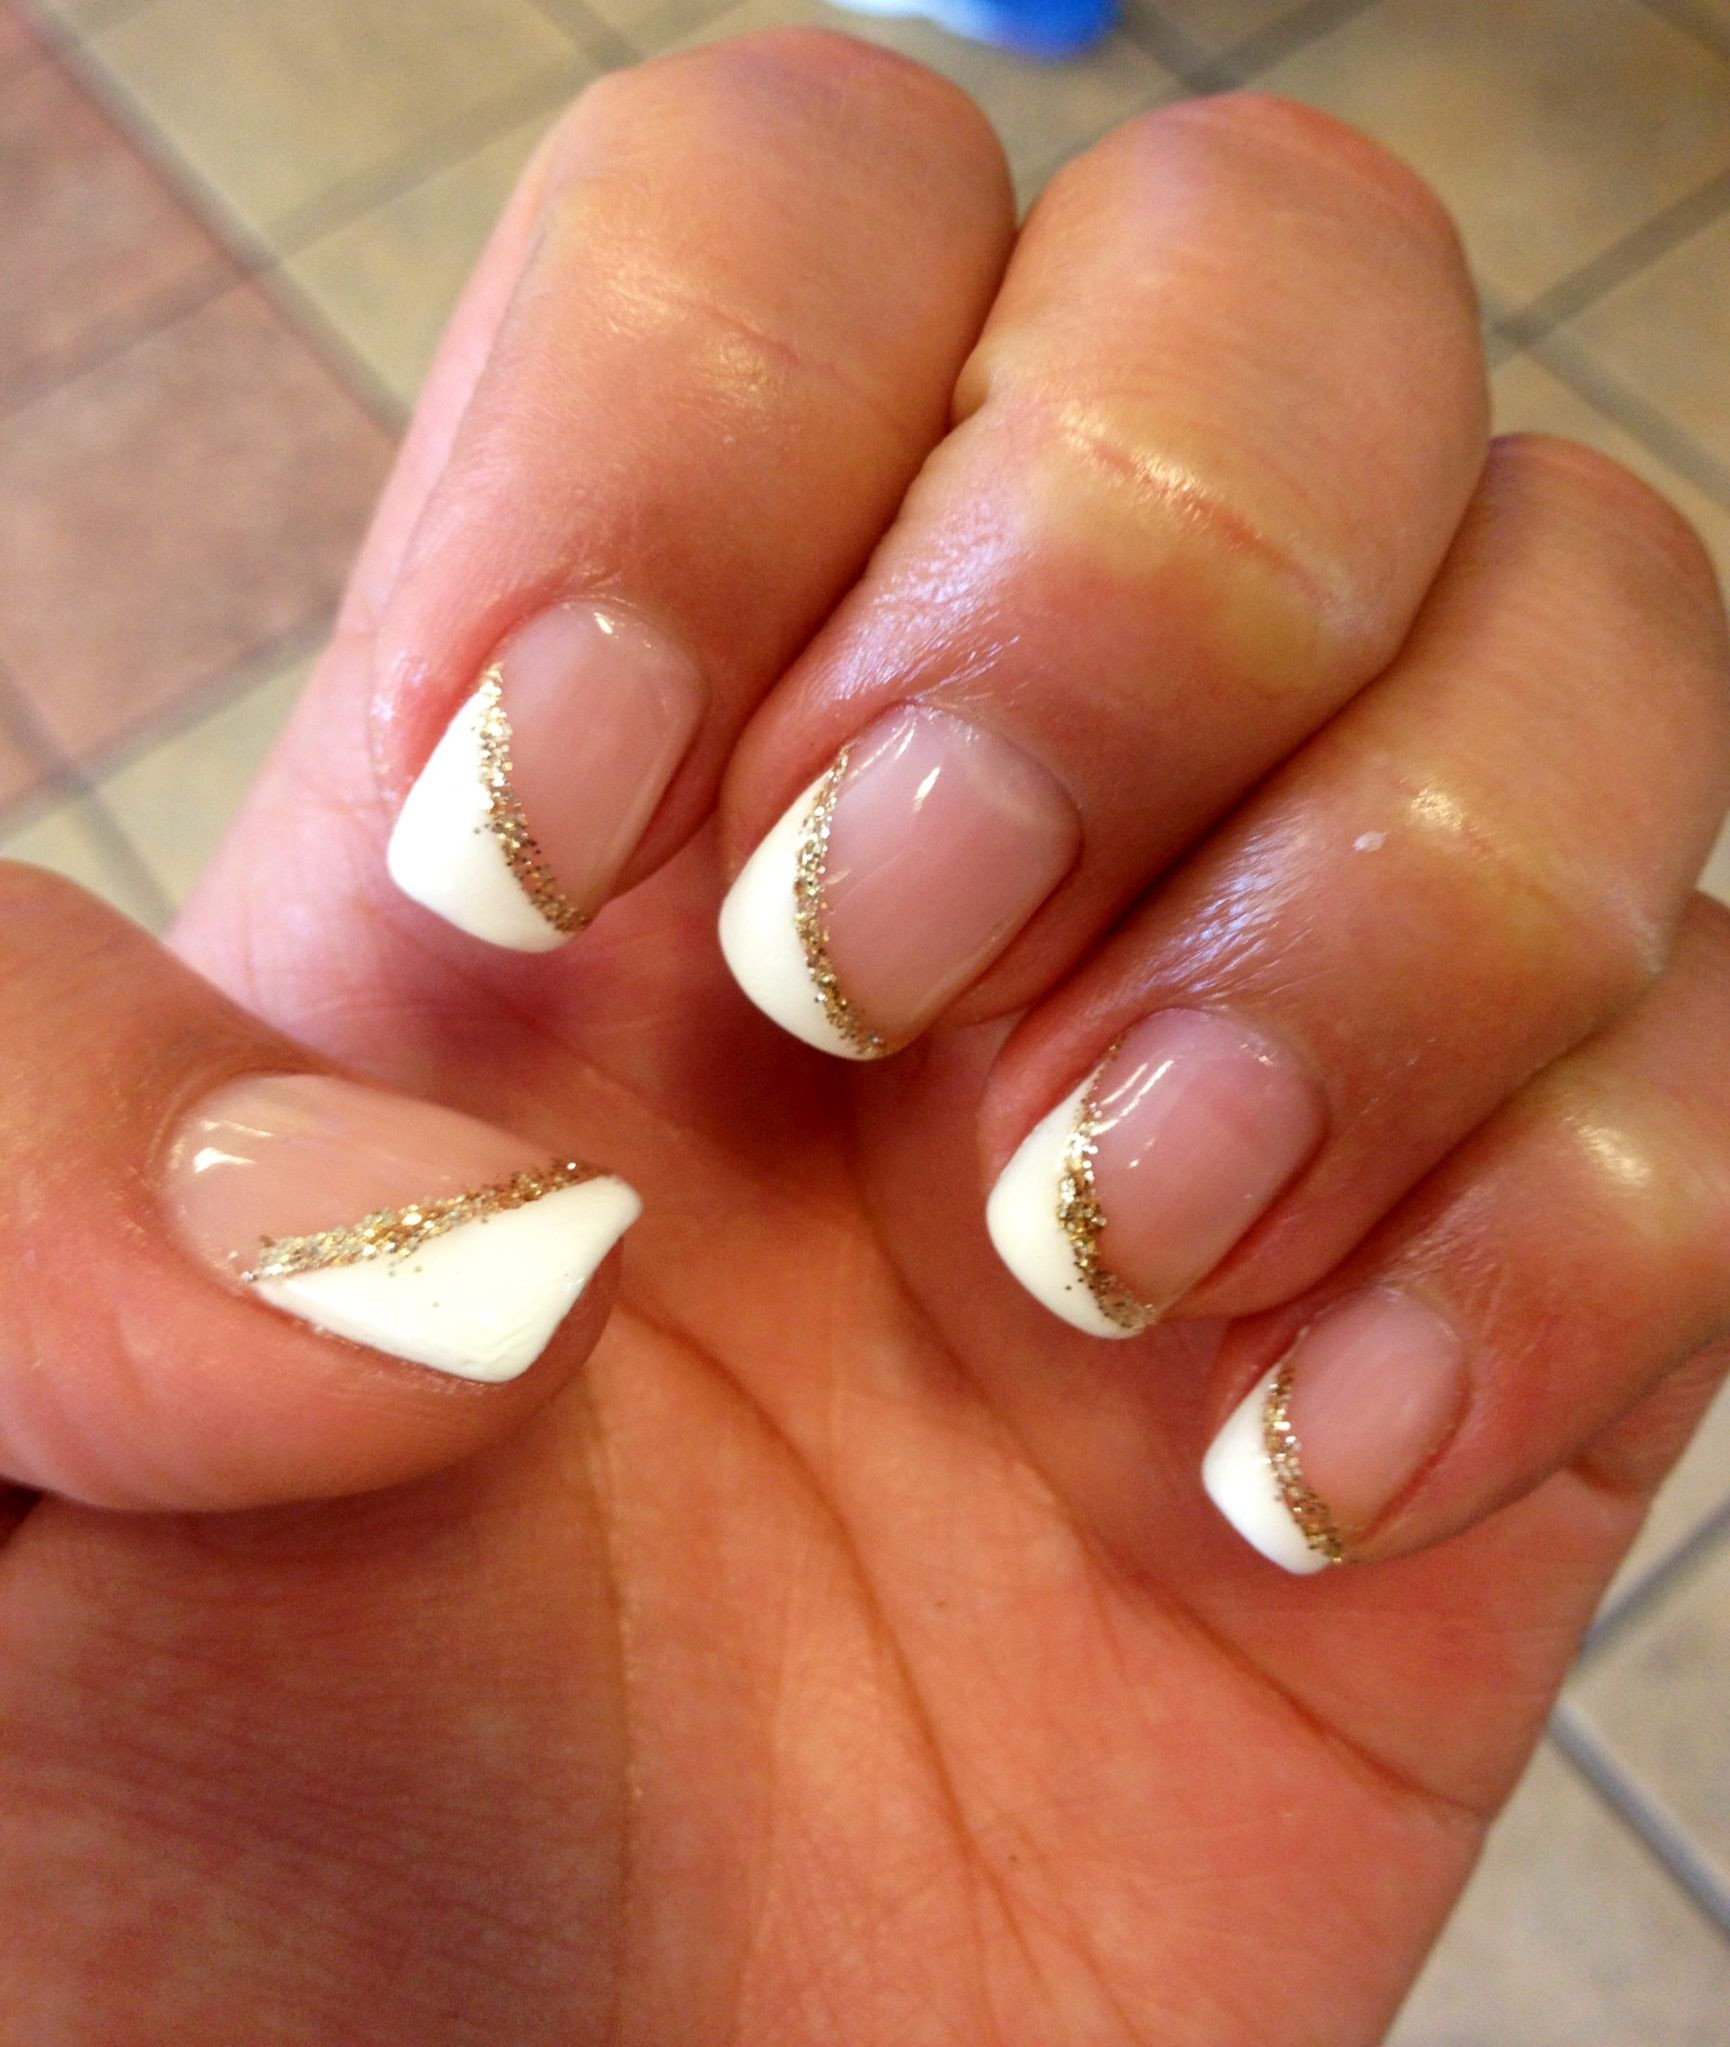 French Tip Nail Designs For Wedding
 My beautiful angled french tip Wedding Nails